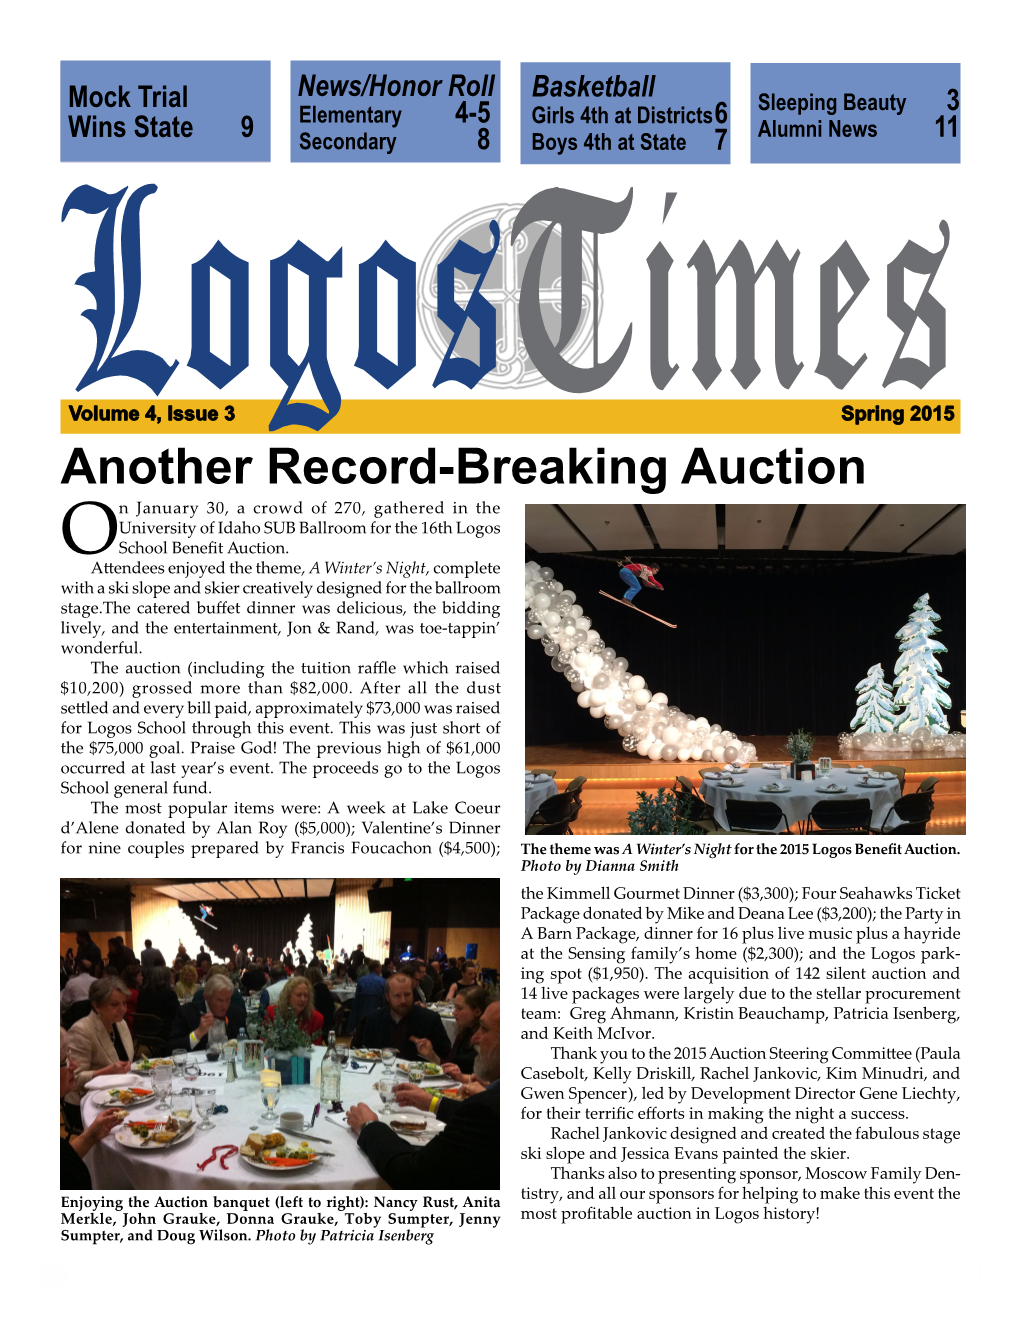 Another Record-Breaking Auction N January 30, a Crowd of 270, Gathered in the University of Idaho SUB Ballroom for the 16Th Logos Oschool Benefit Auction